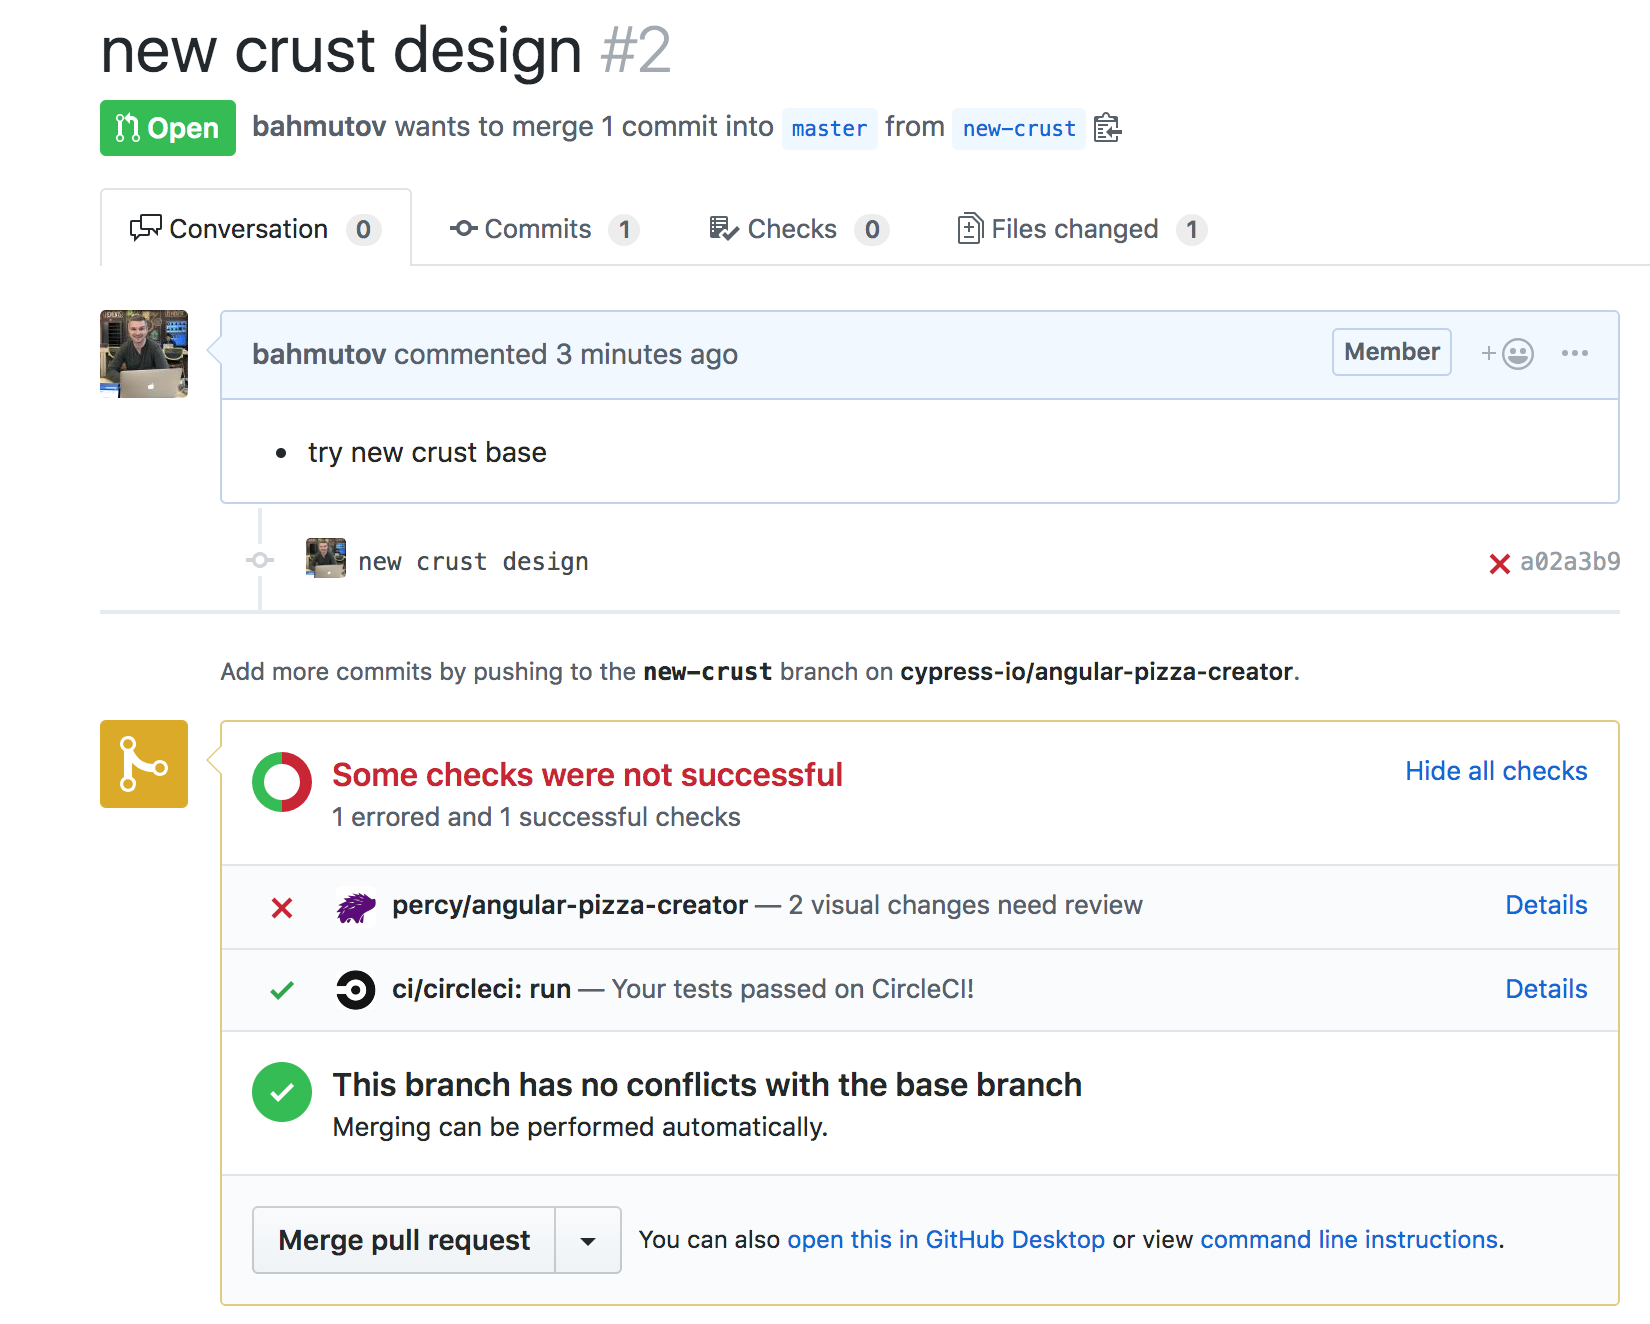 Functional tests and visual diff status for pull request